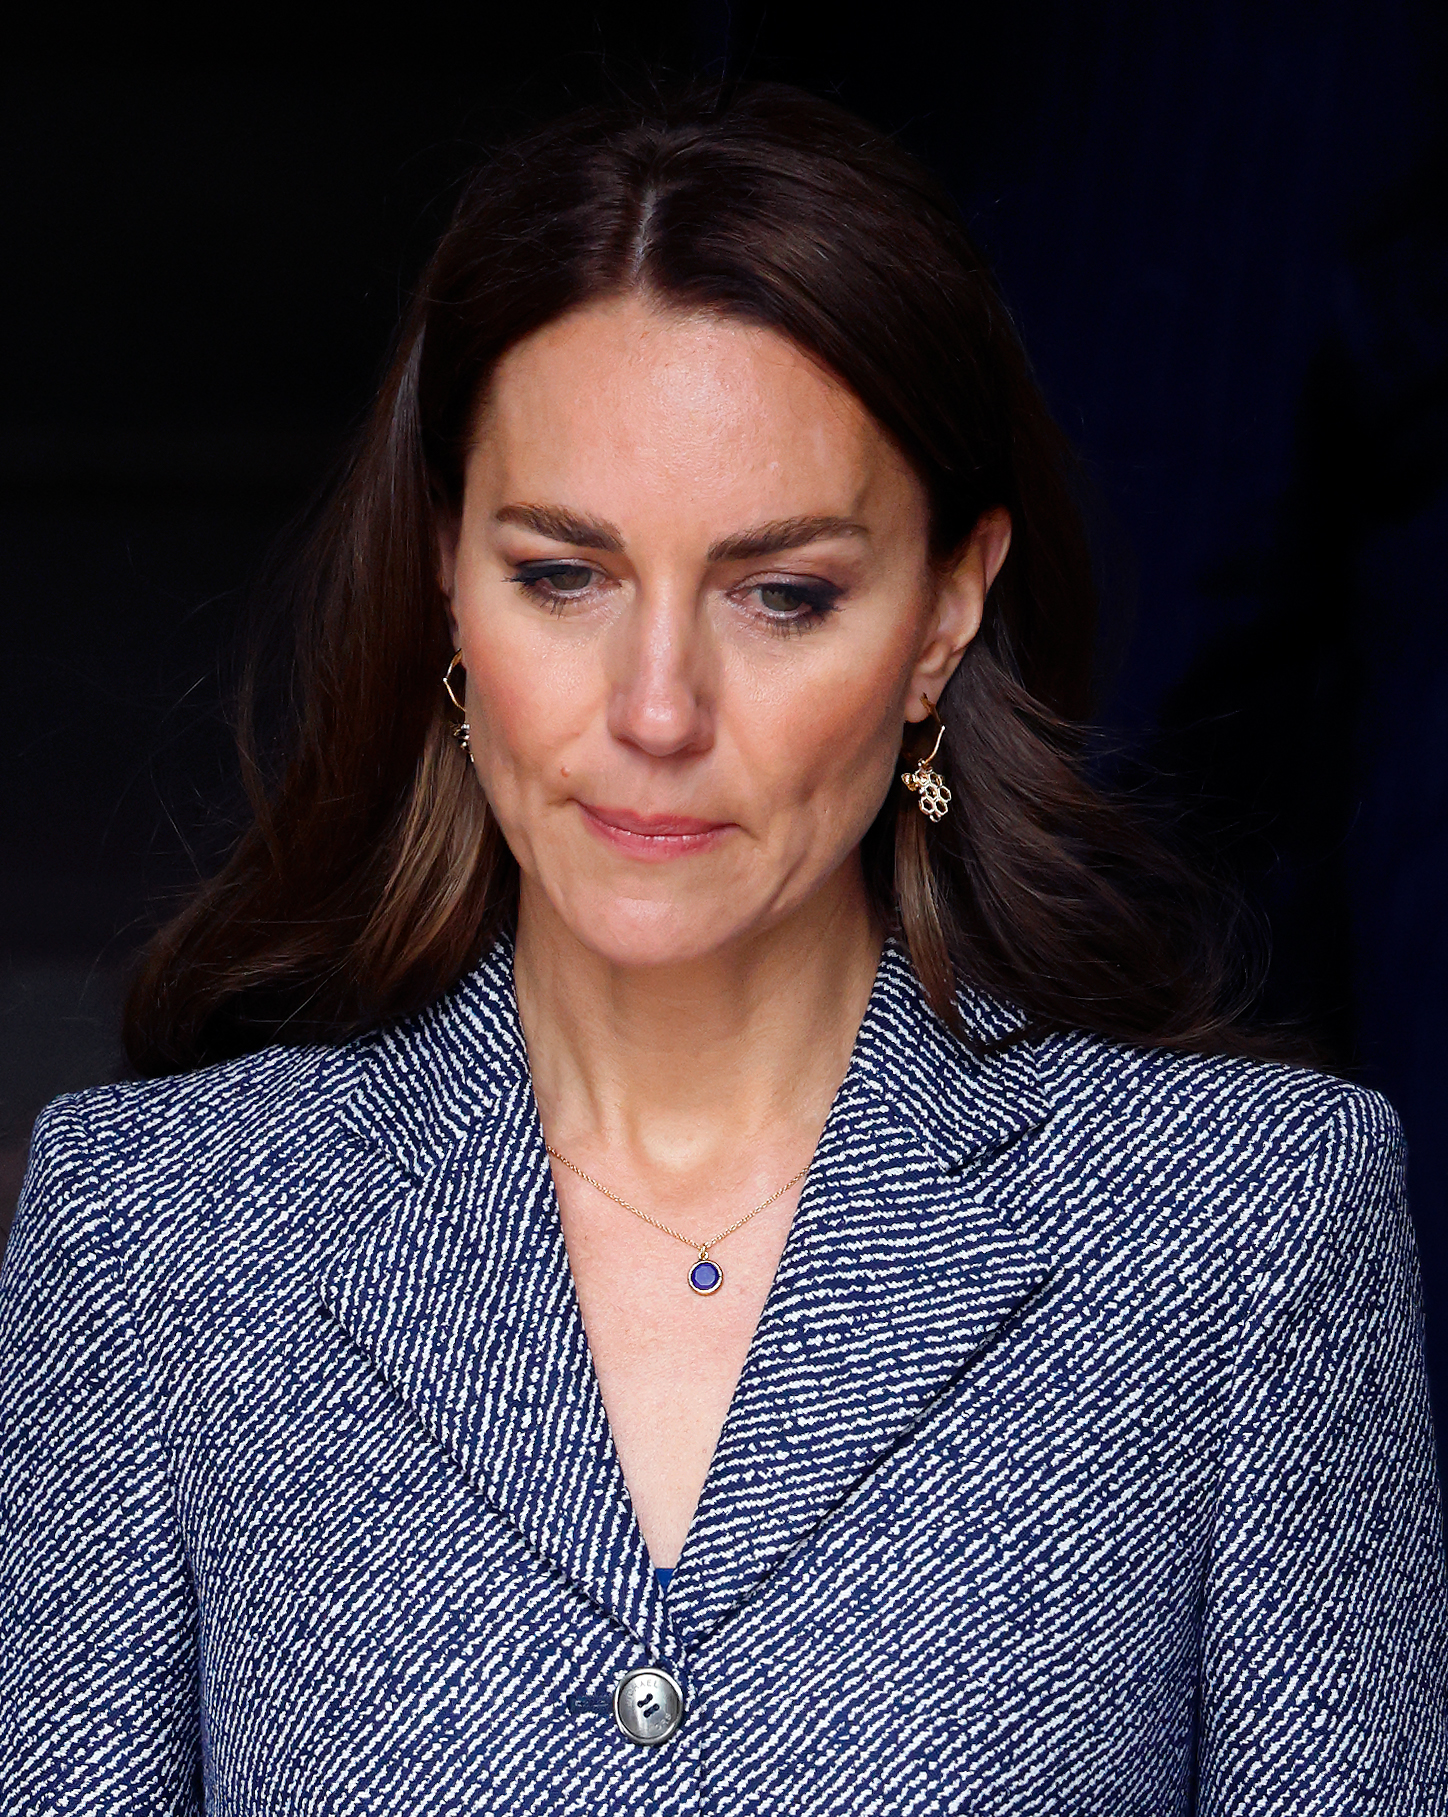 Catherine, Duchess of Cambridge at the official opening of the Glade of Light Memorial on May 10, 2022, in Manchester, England | Source: Getty Images